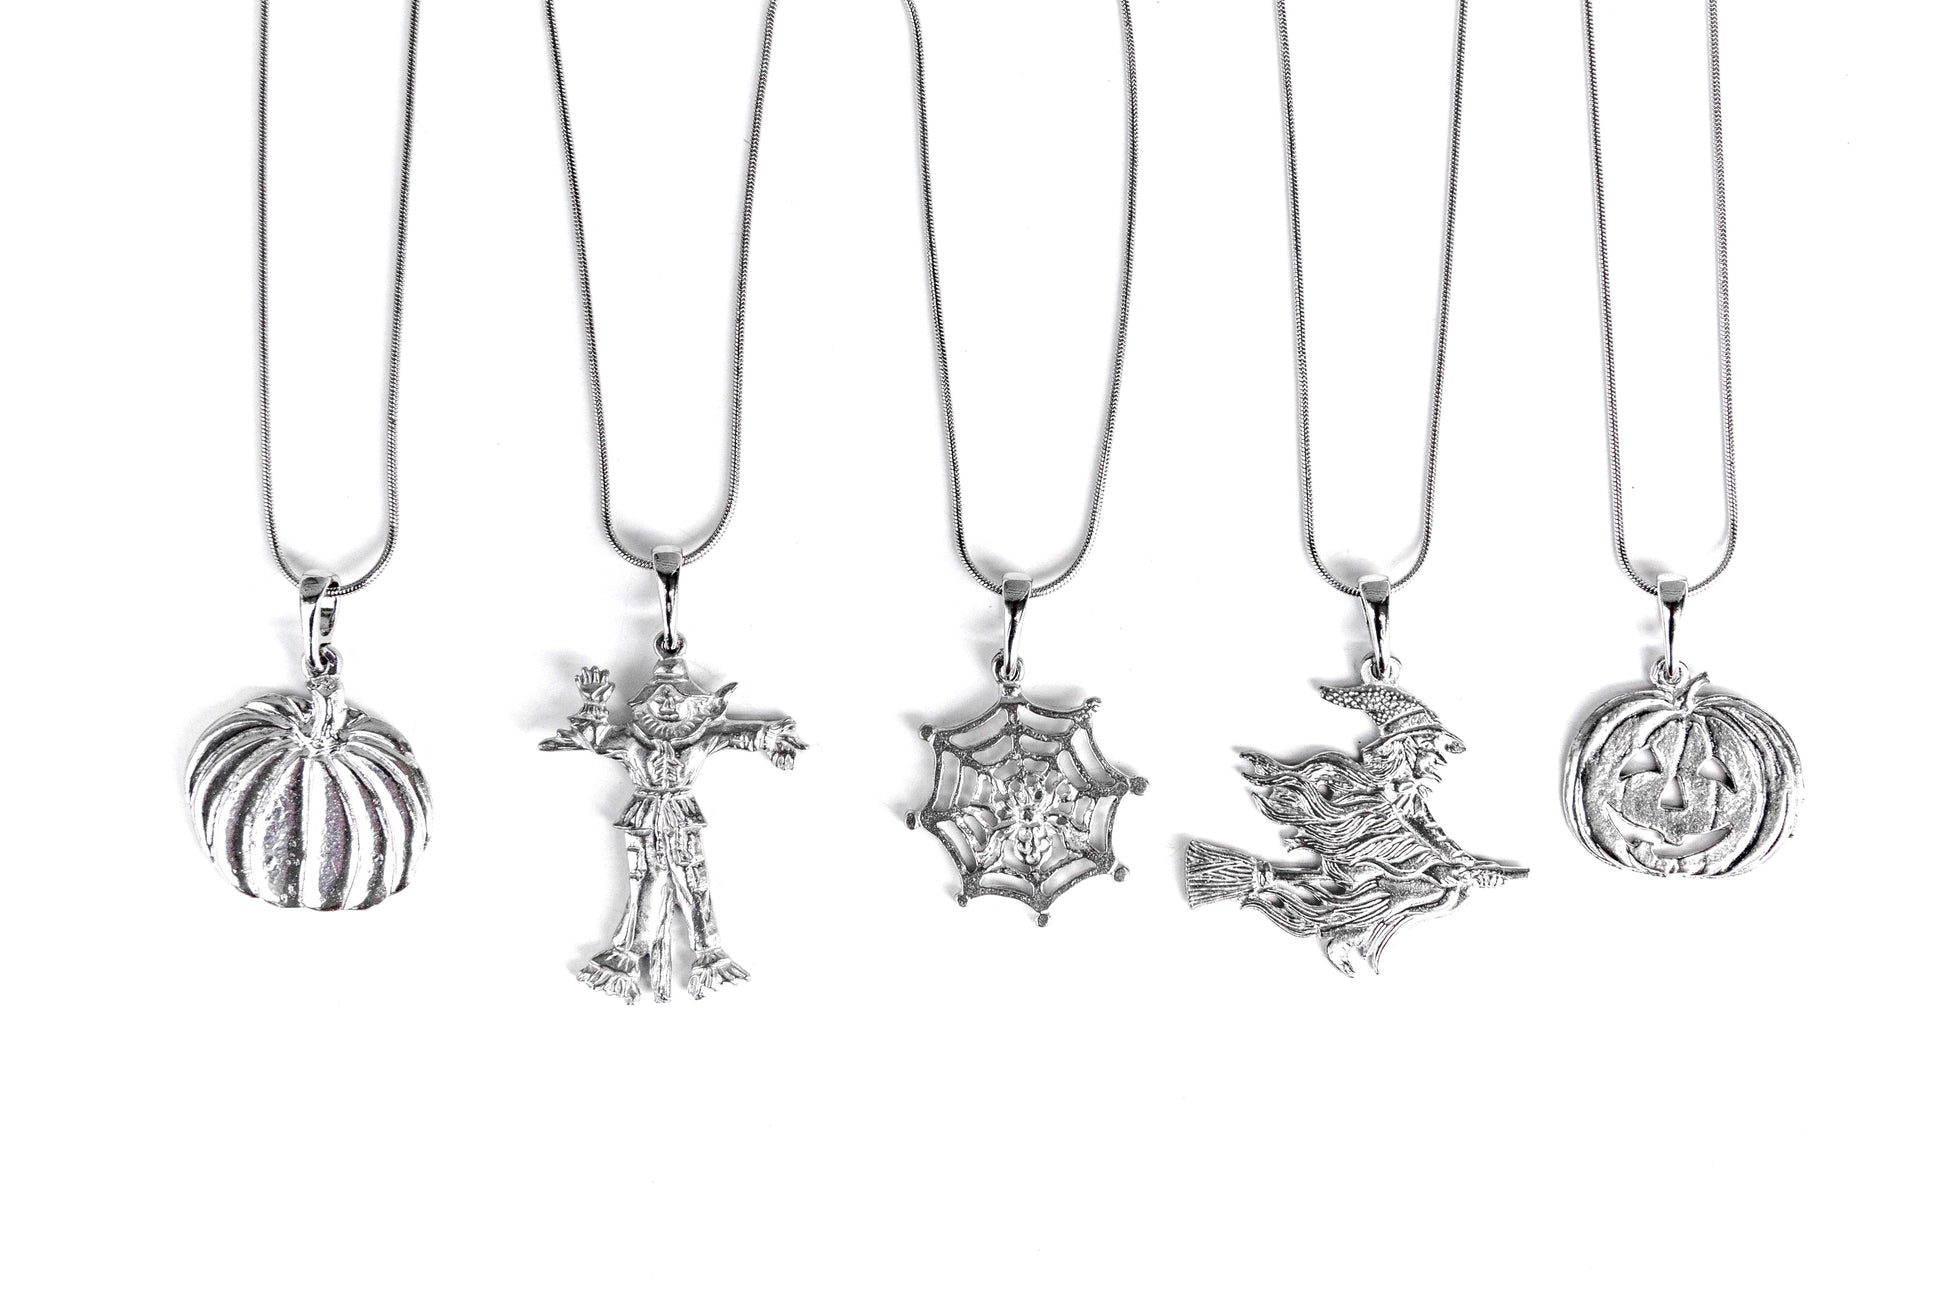 House of Morgan Pewter Real Snowflake Jewelry Gifts -Real Snowflake Pendant - Necklaces - Earrings - Keychain Pendant Only (bail)